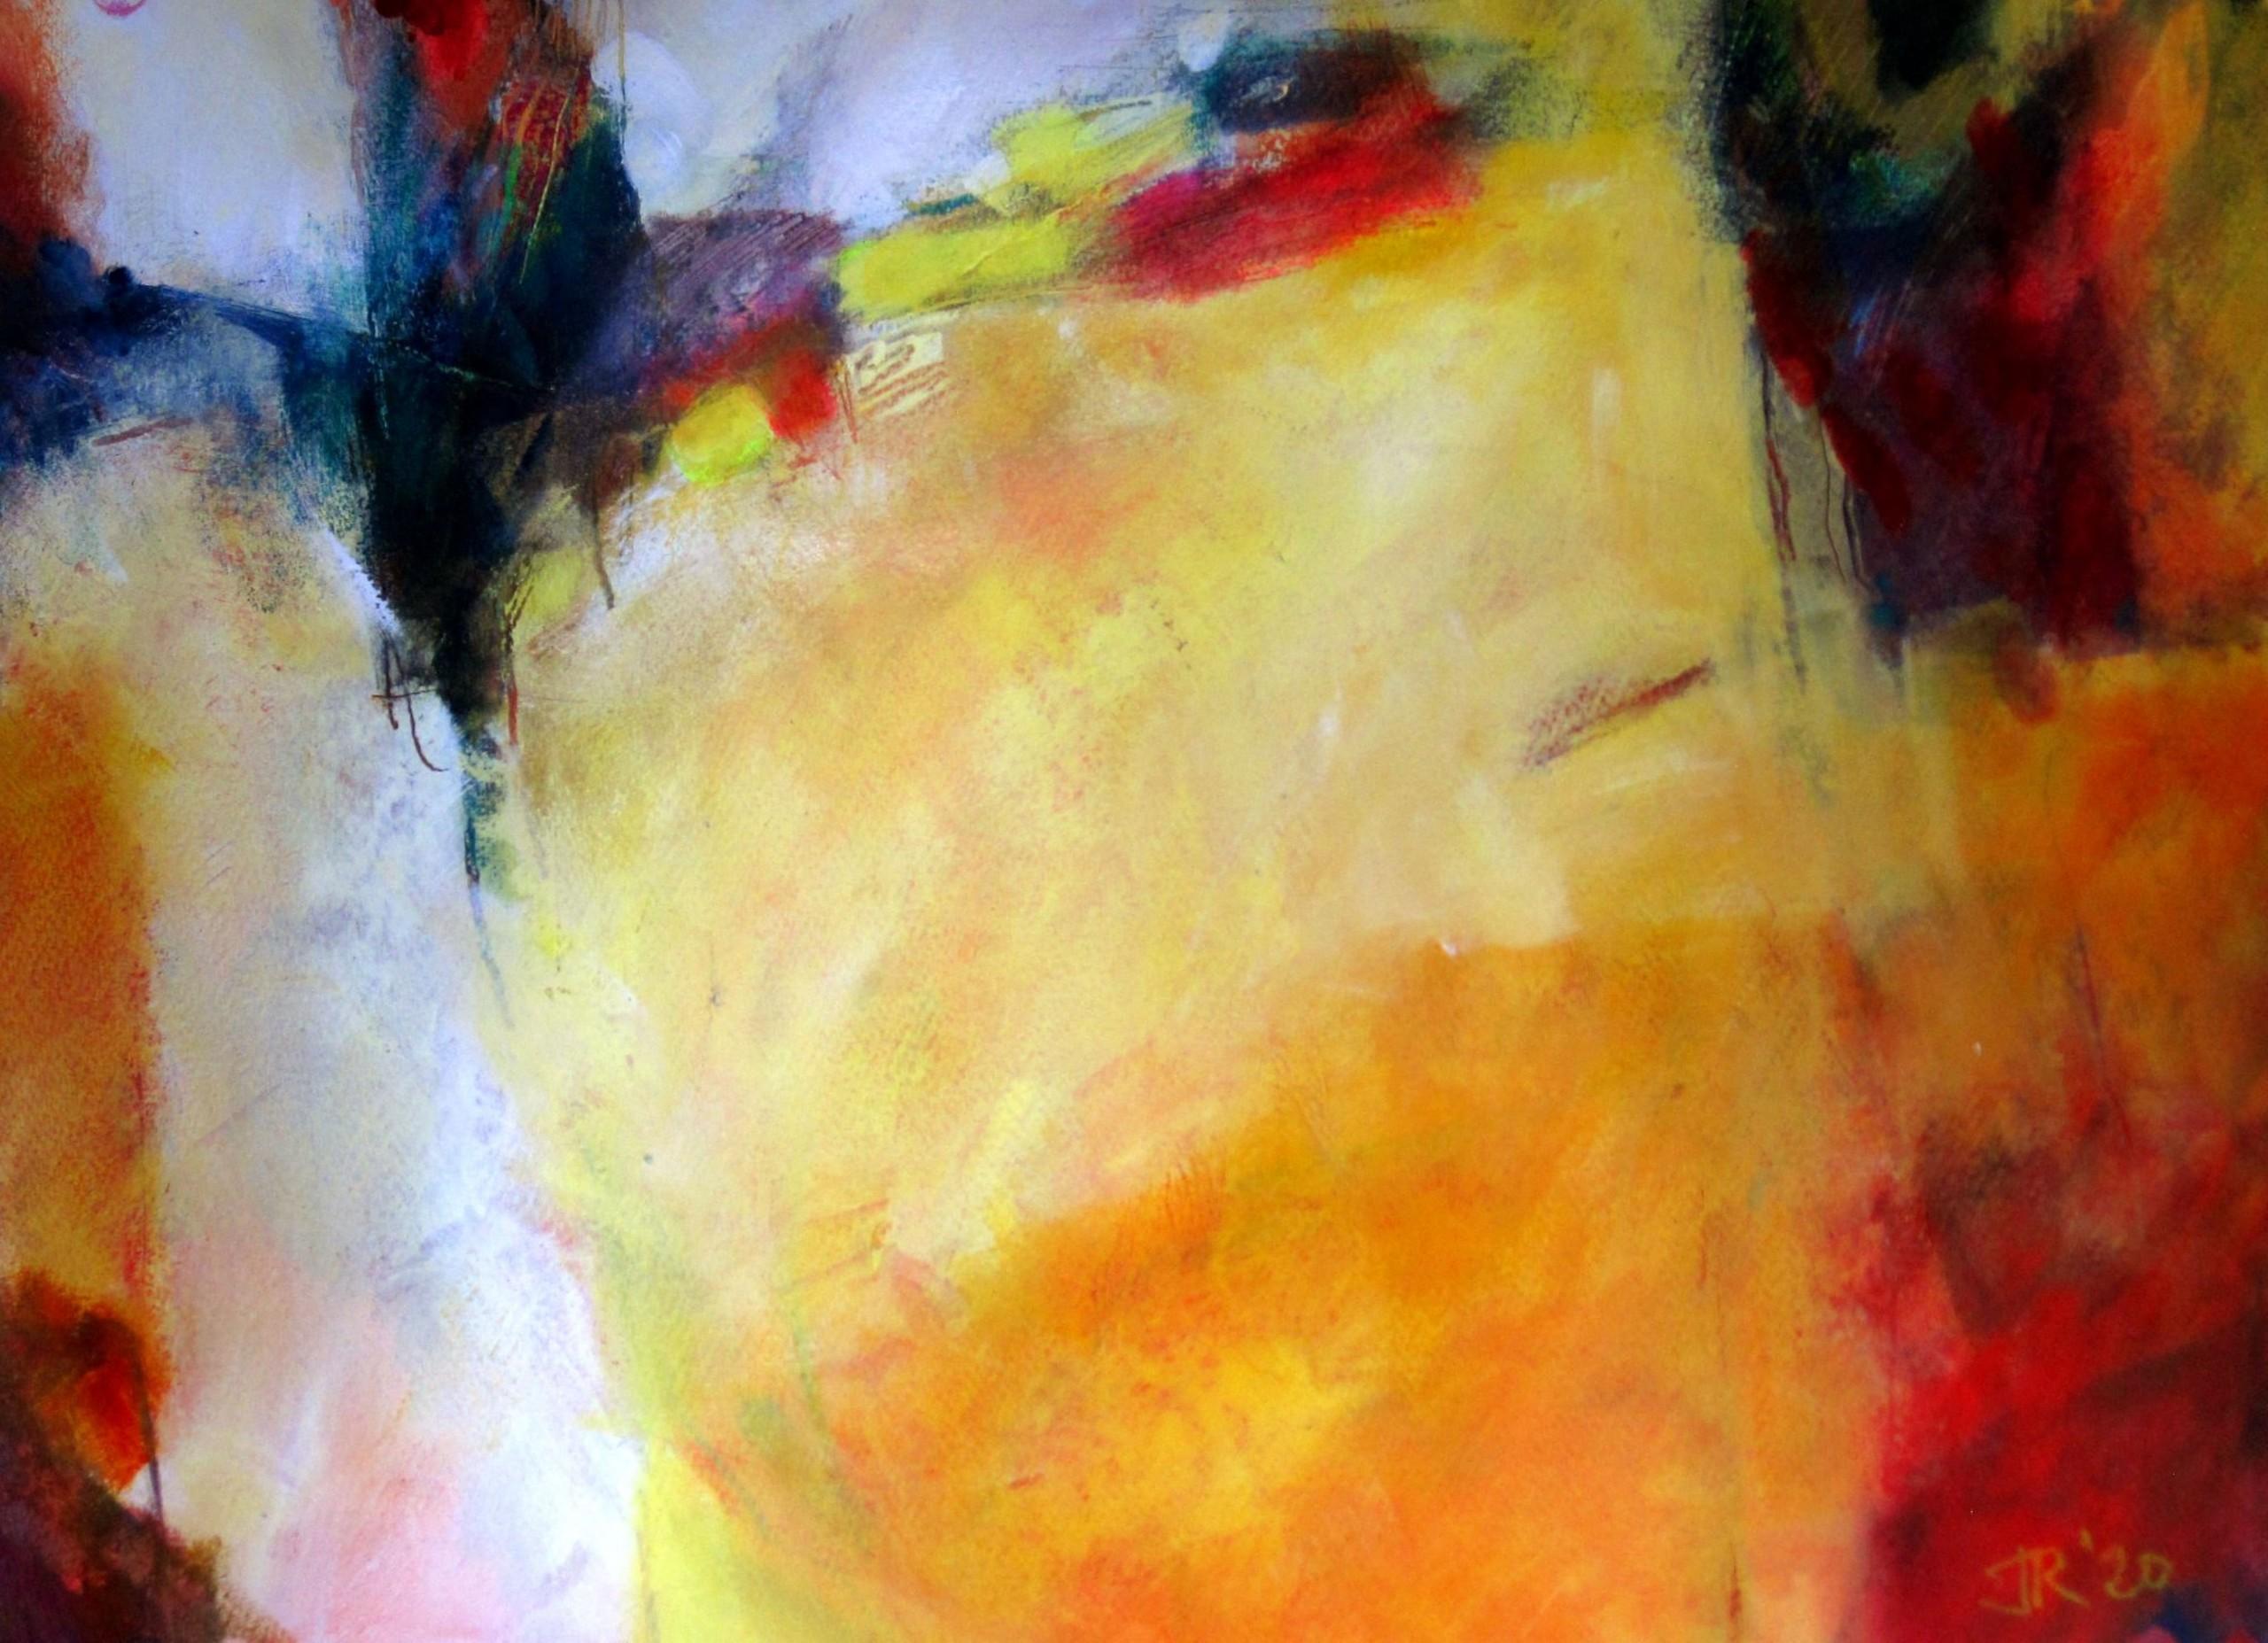 Yellow Landscape – Jon Rowland – Abstract Expressionism [2020]

original
Mixed media of acrylic, oil, and collage on paper
Image size: H:51 cm x W:71 cm
Complete Size of Unframed Work: H:56 cm x W:76 cm x D:.1cm
Frame Size: H:72 cm x W:92 cm x